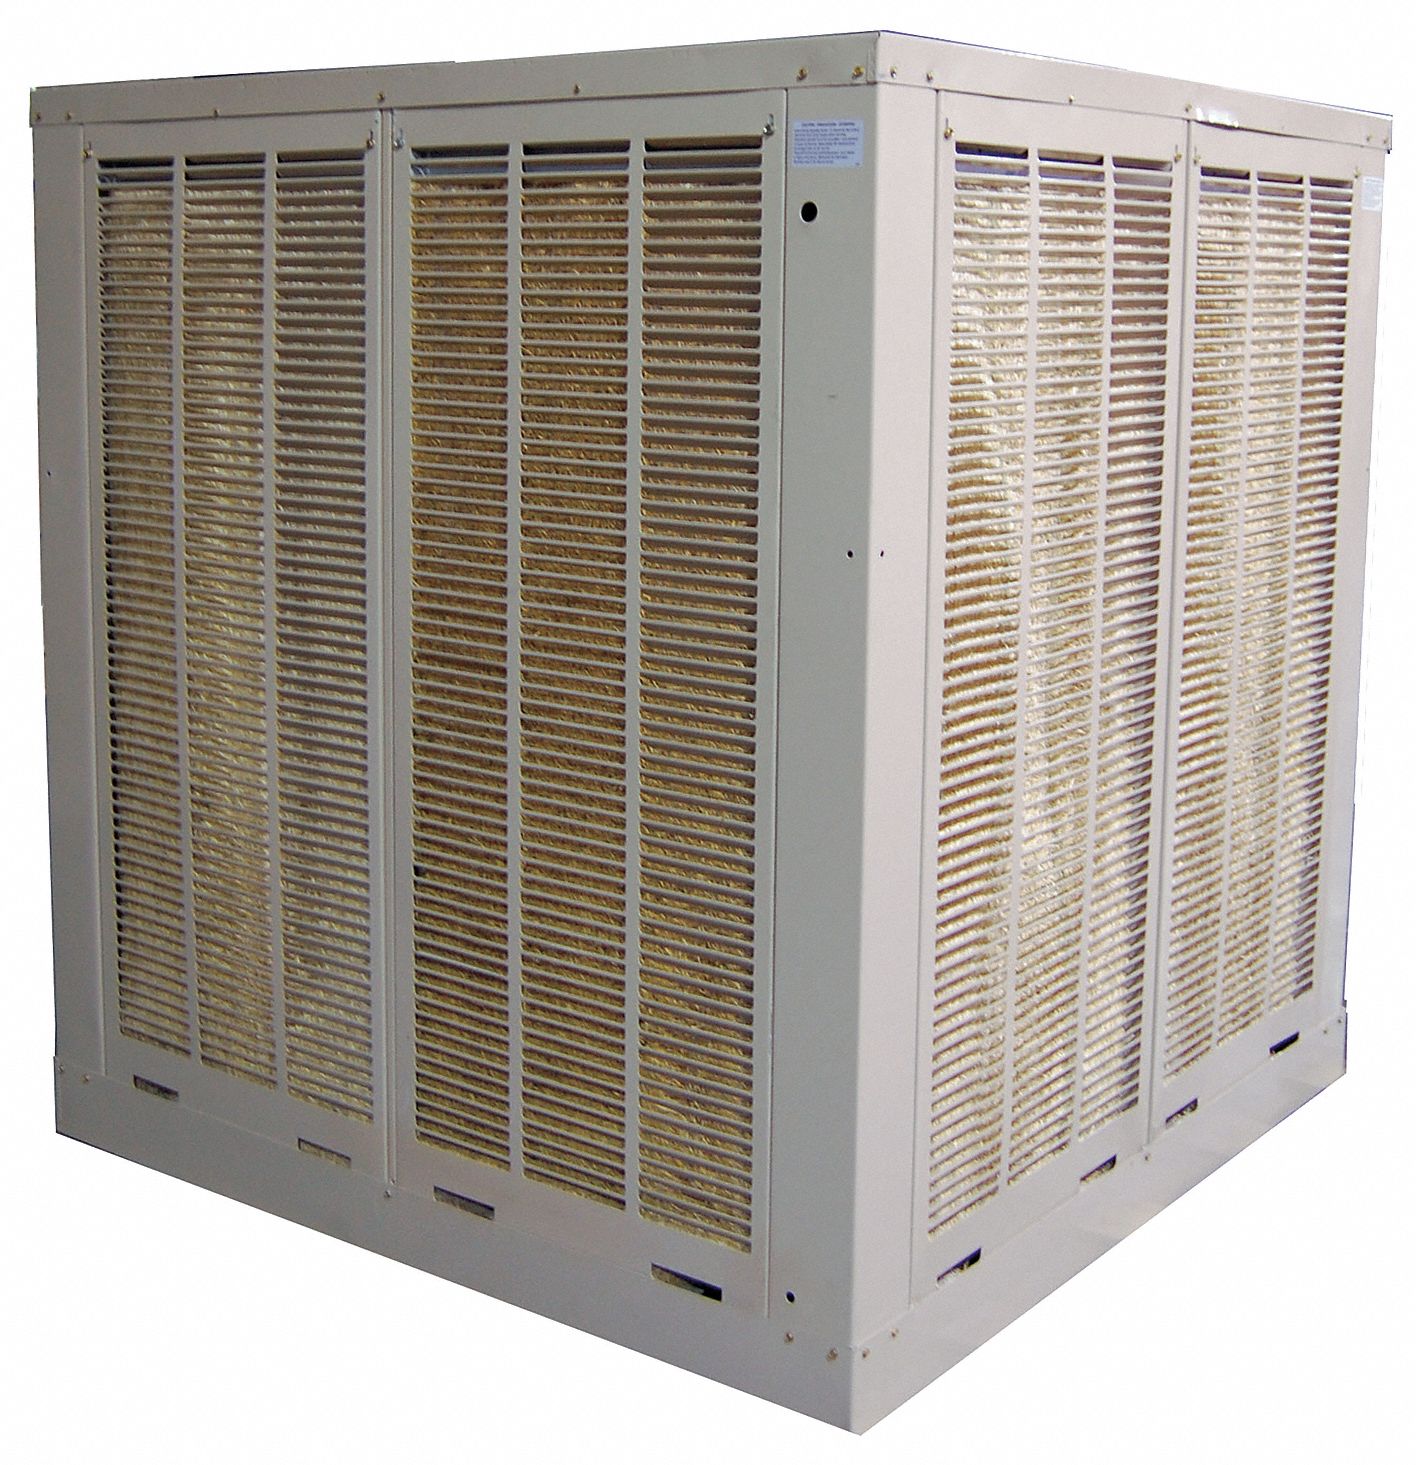 5FTT4 - Ducted Evap Cooler 14000 to 21000 cfm